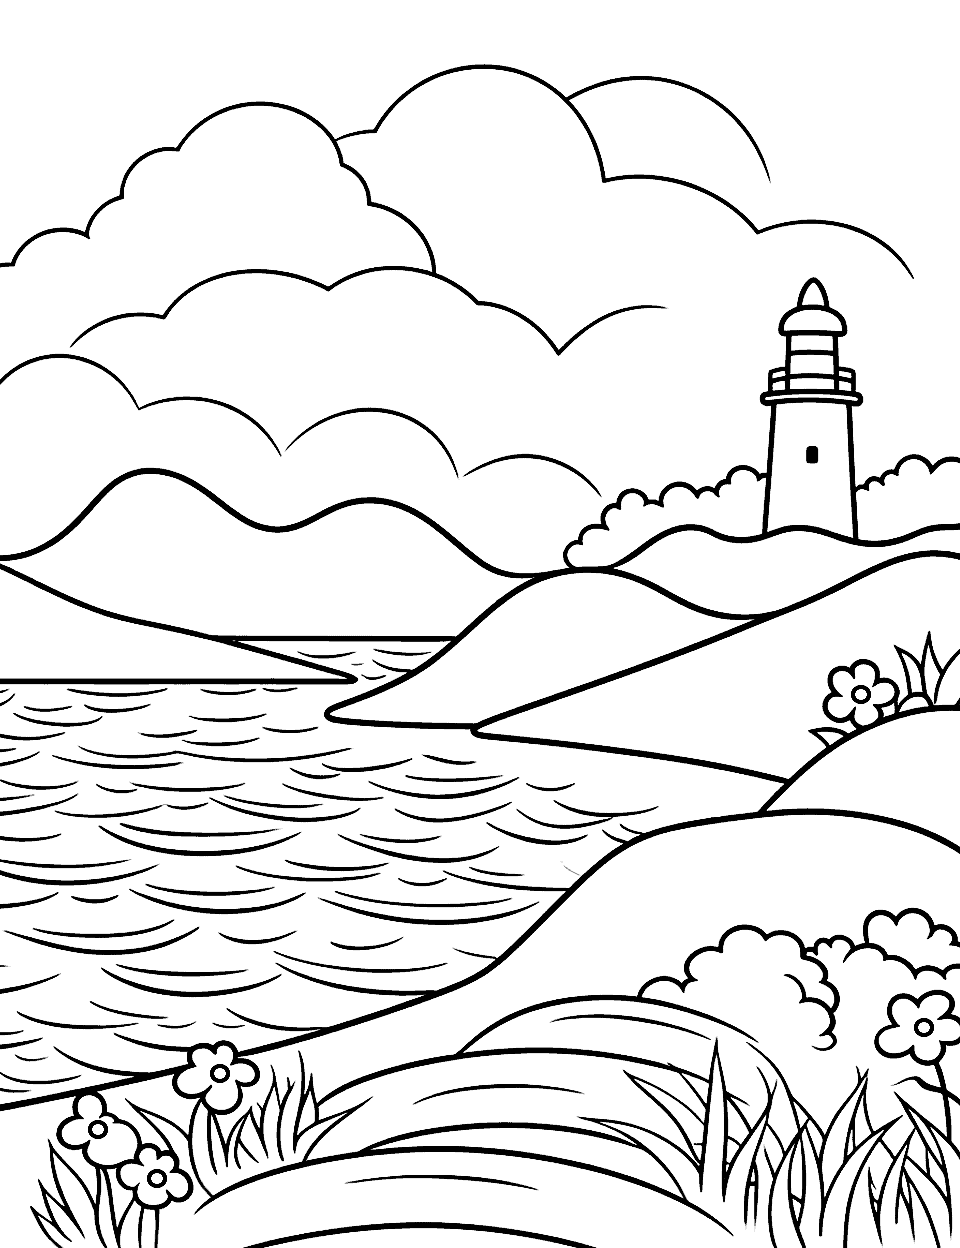 Lighthouse by the Sea Coloring Page - A lighthouse standing tall by the sea shore.